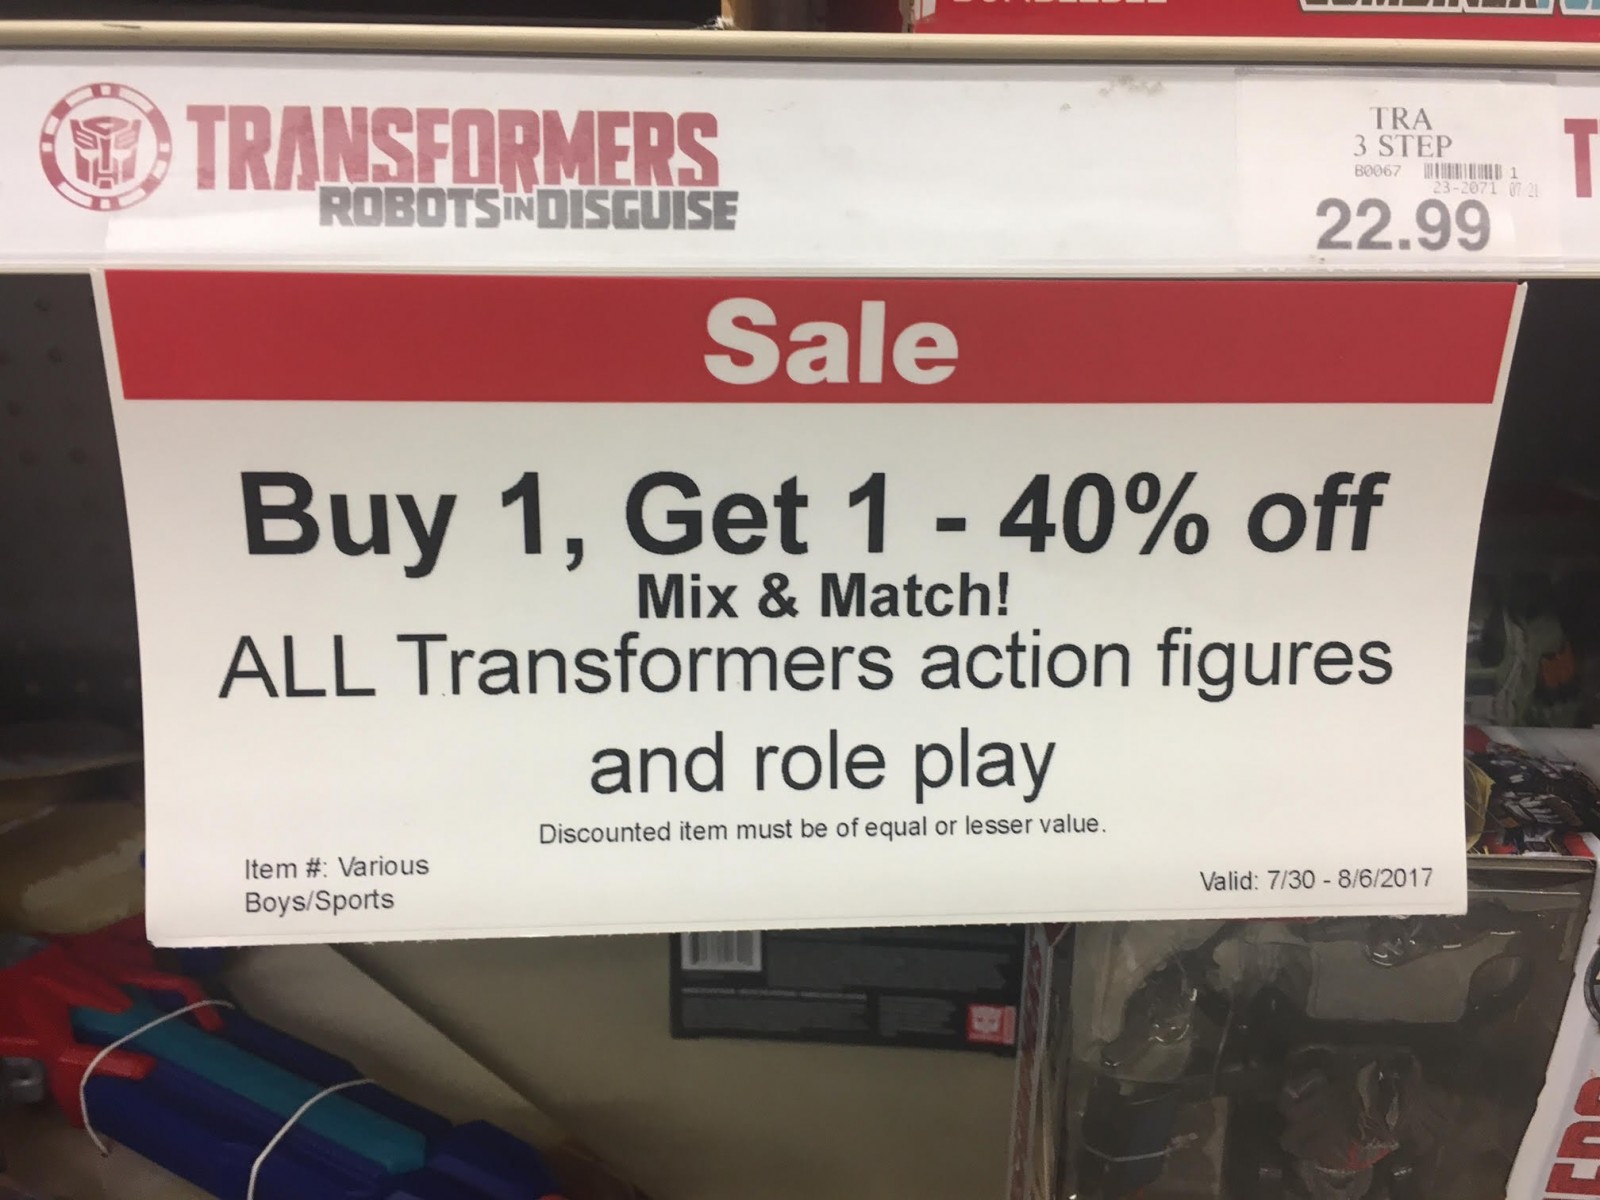 Transformers News: ToysRus BOGO 40% Off In Store And Online For Transformers Toys